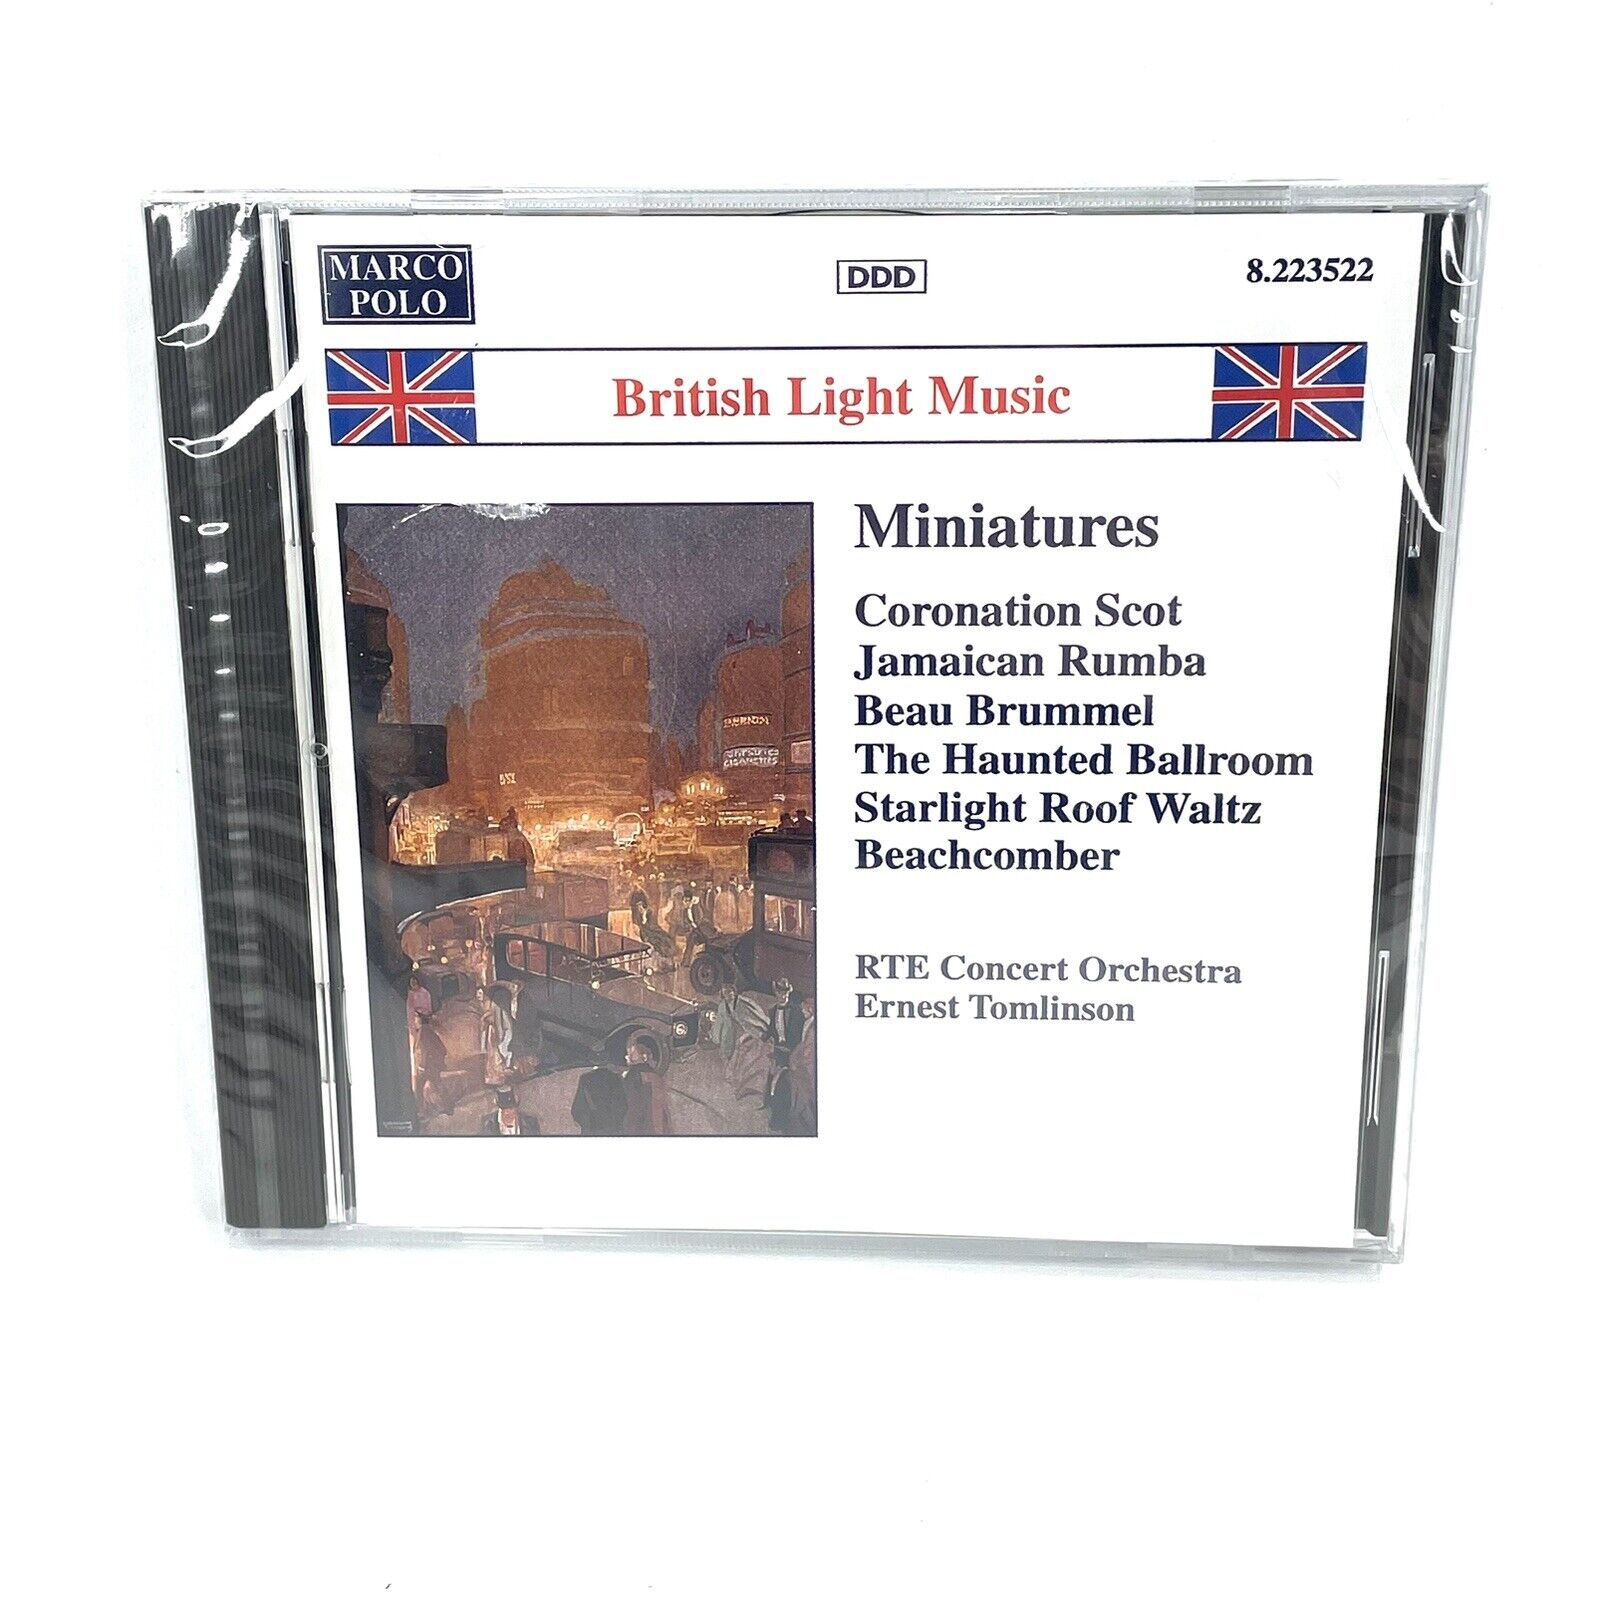 British Light Music Miniatures Tomlinson, Rte Concert Orch CD New Marco Polo